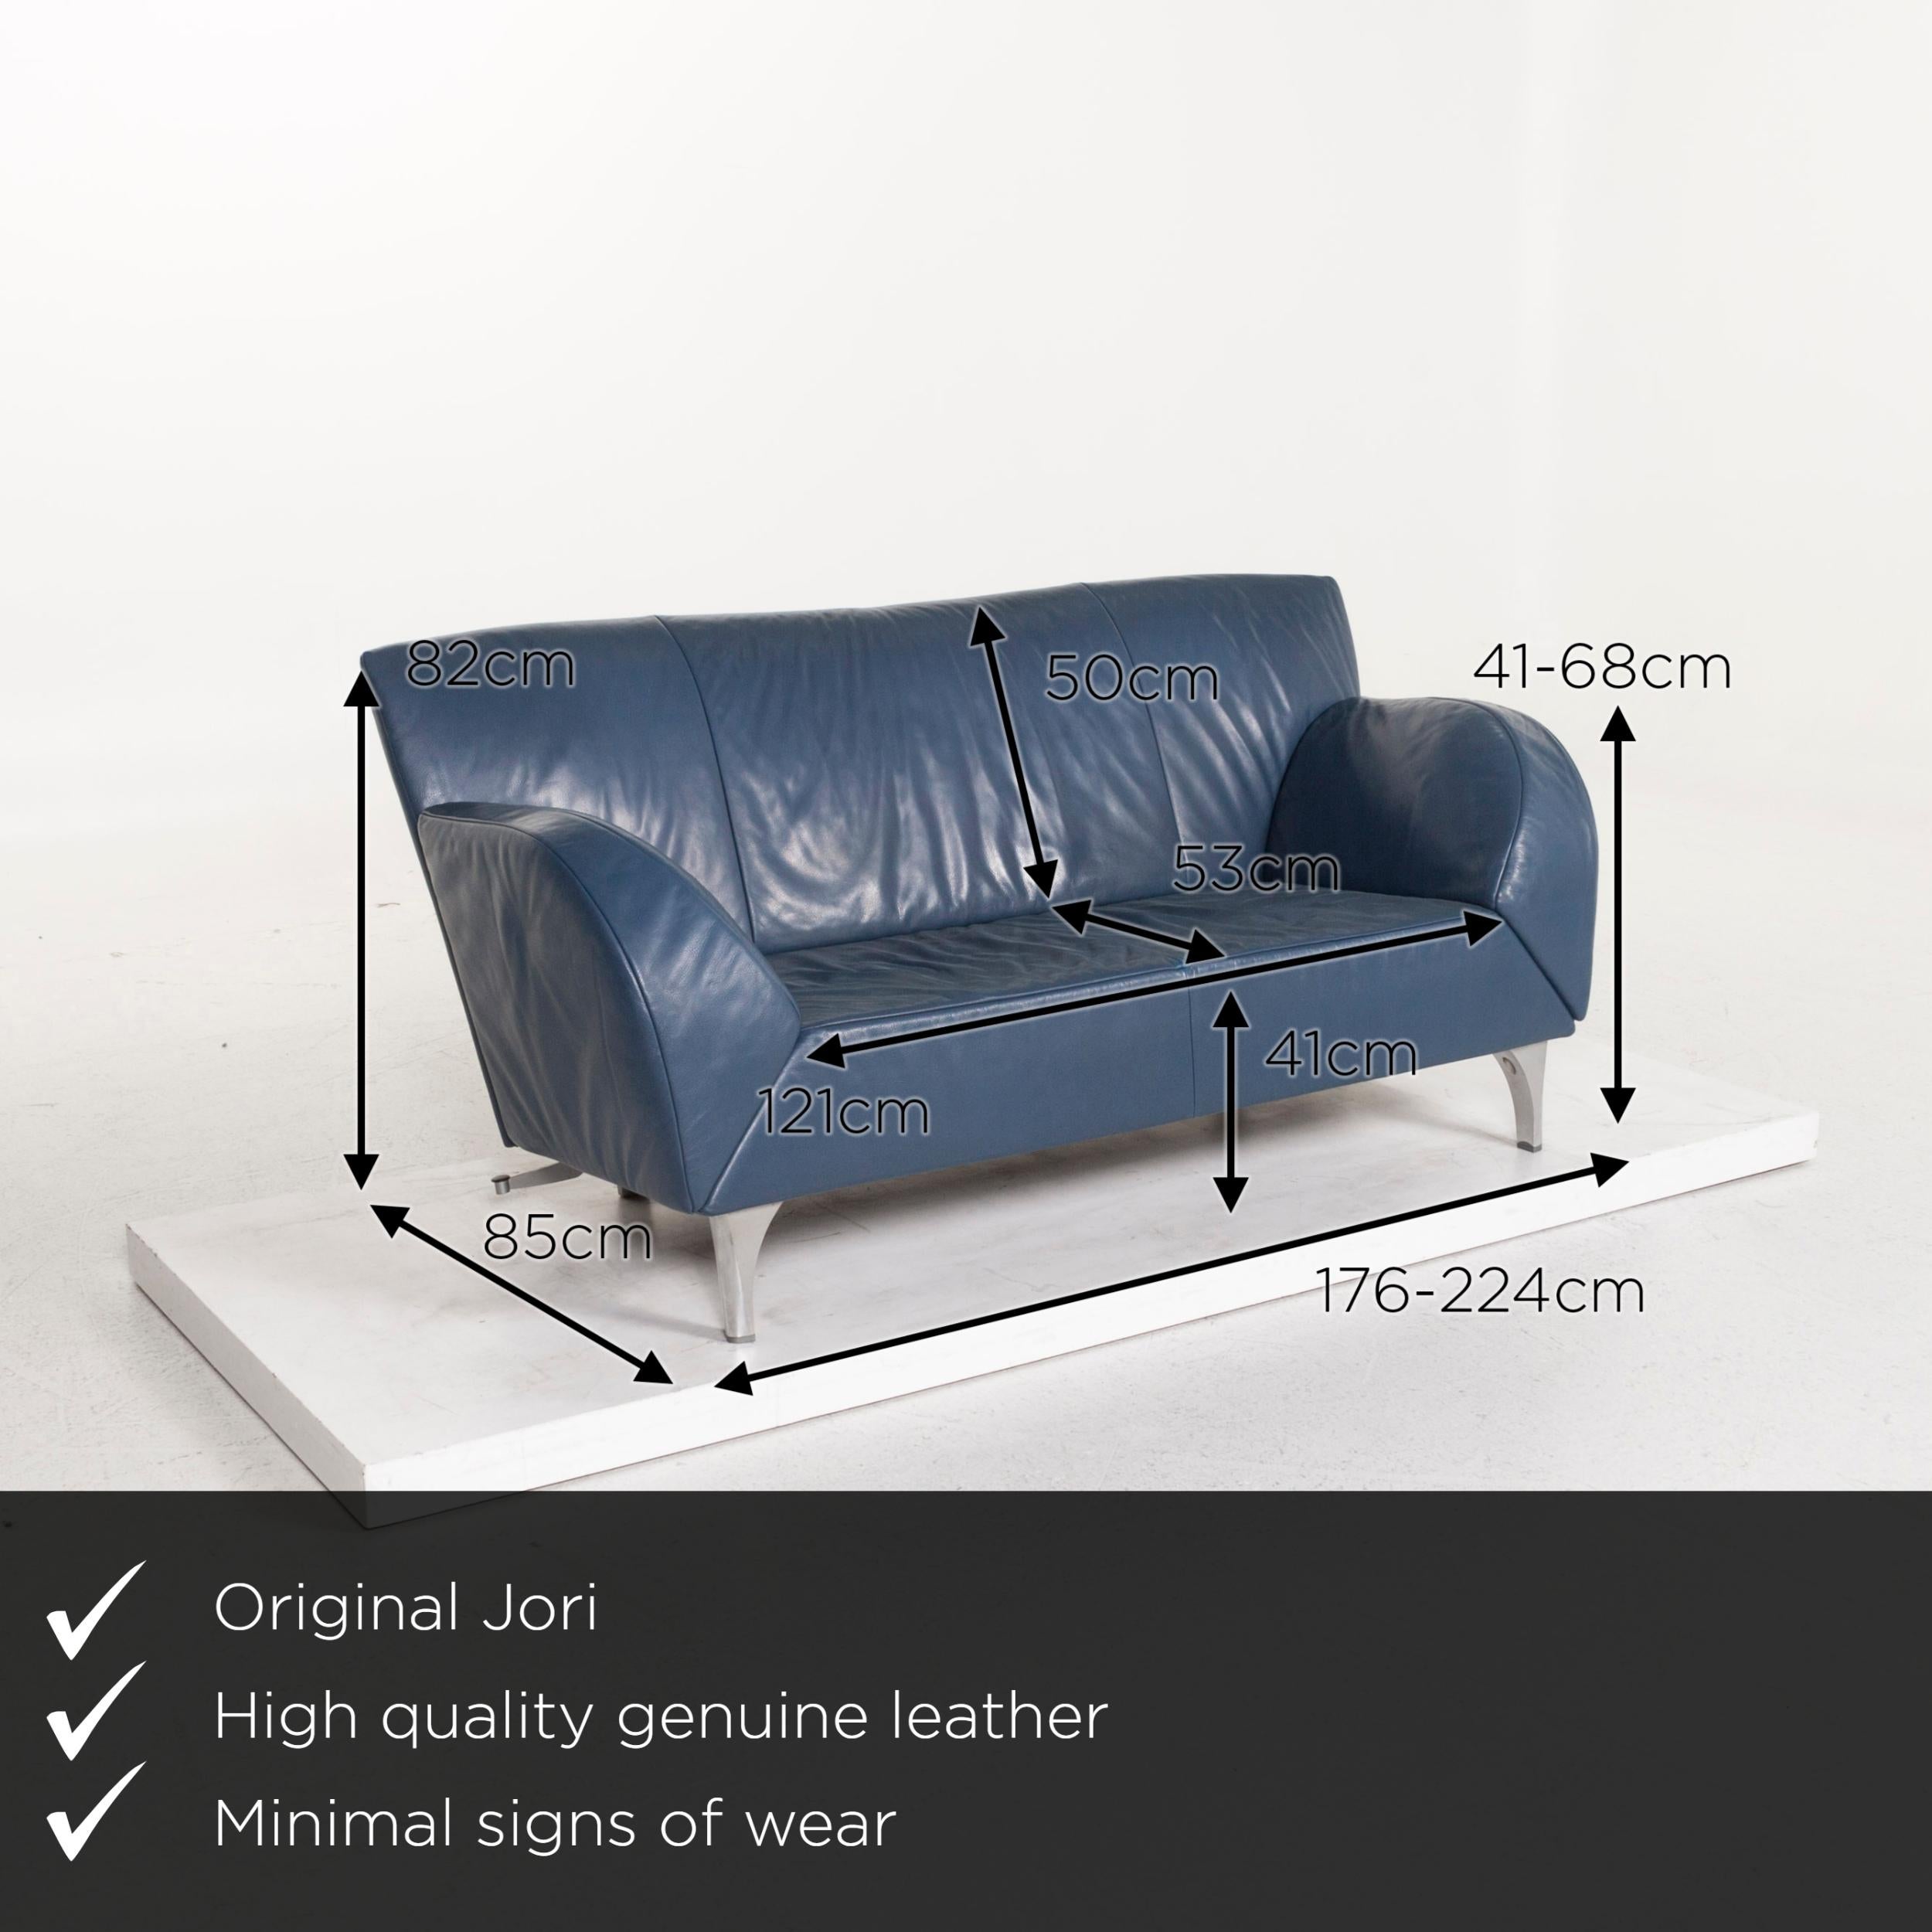 We present to you a Jori leather sofa blue function two-seat couch.
 

 Product measurements in centimeters:
 

Depth 85
Width 176
Height 82
Seat height 41
Rest height 41
Seat depth 53
Seat width 121
Back height 50.

 